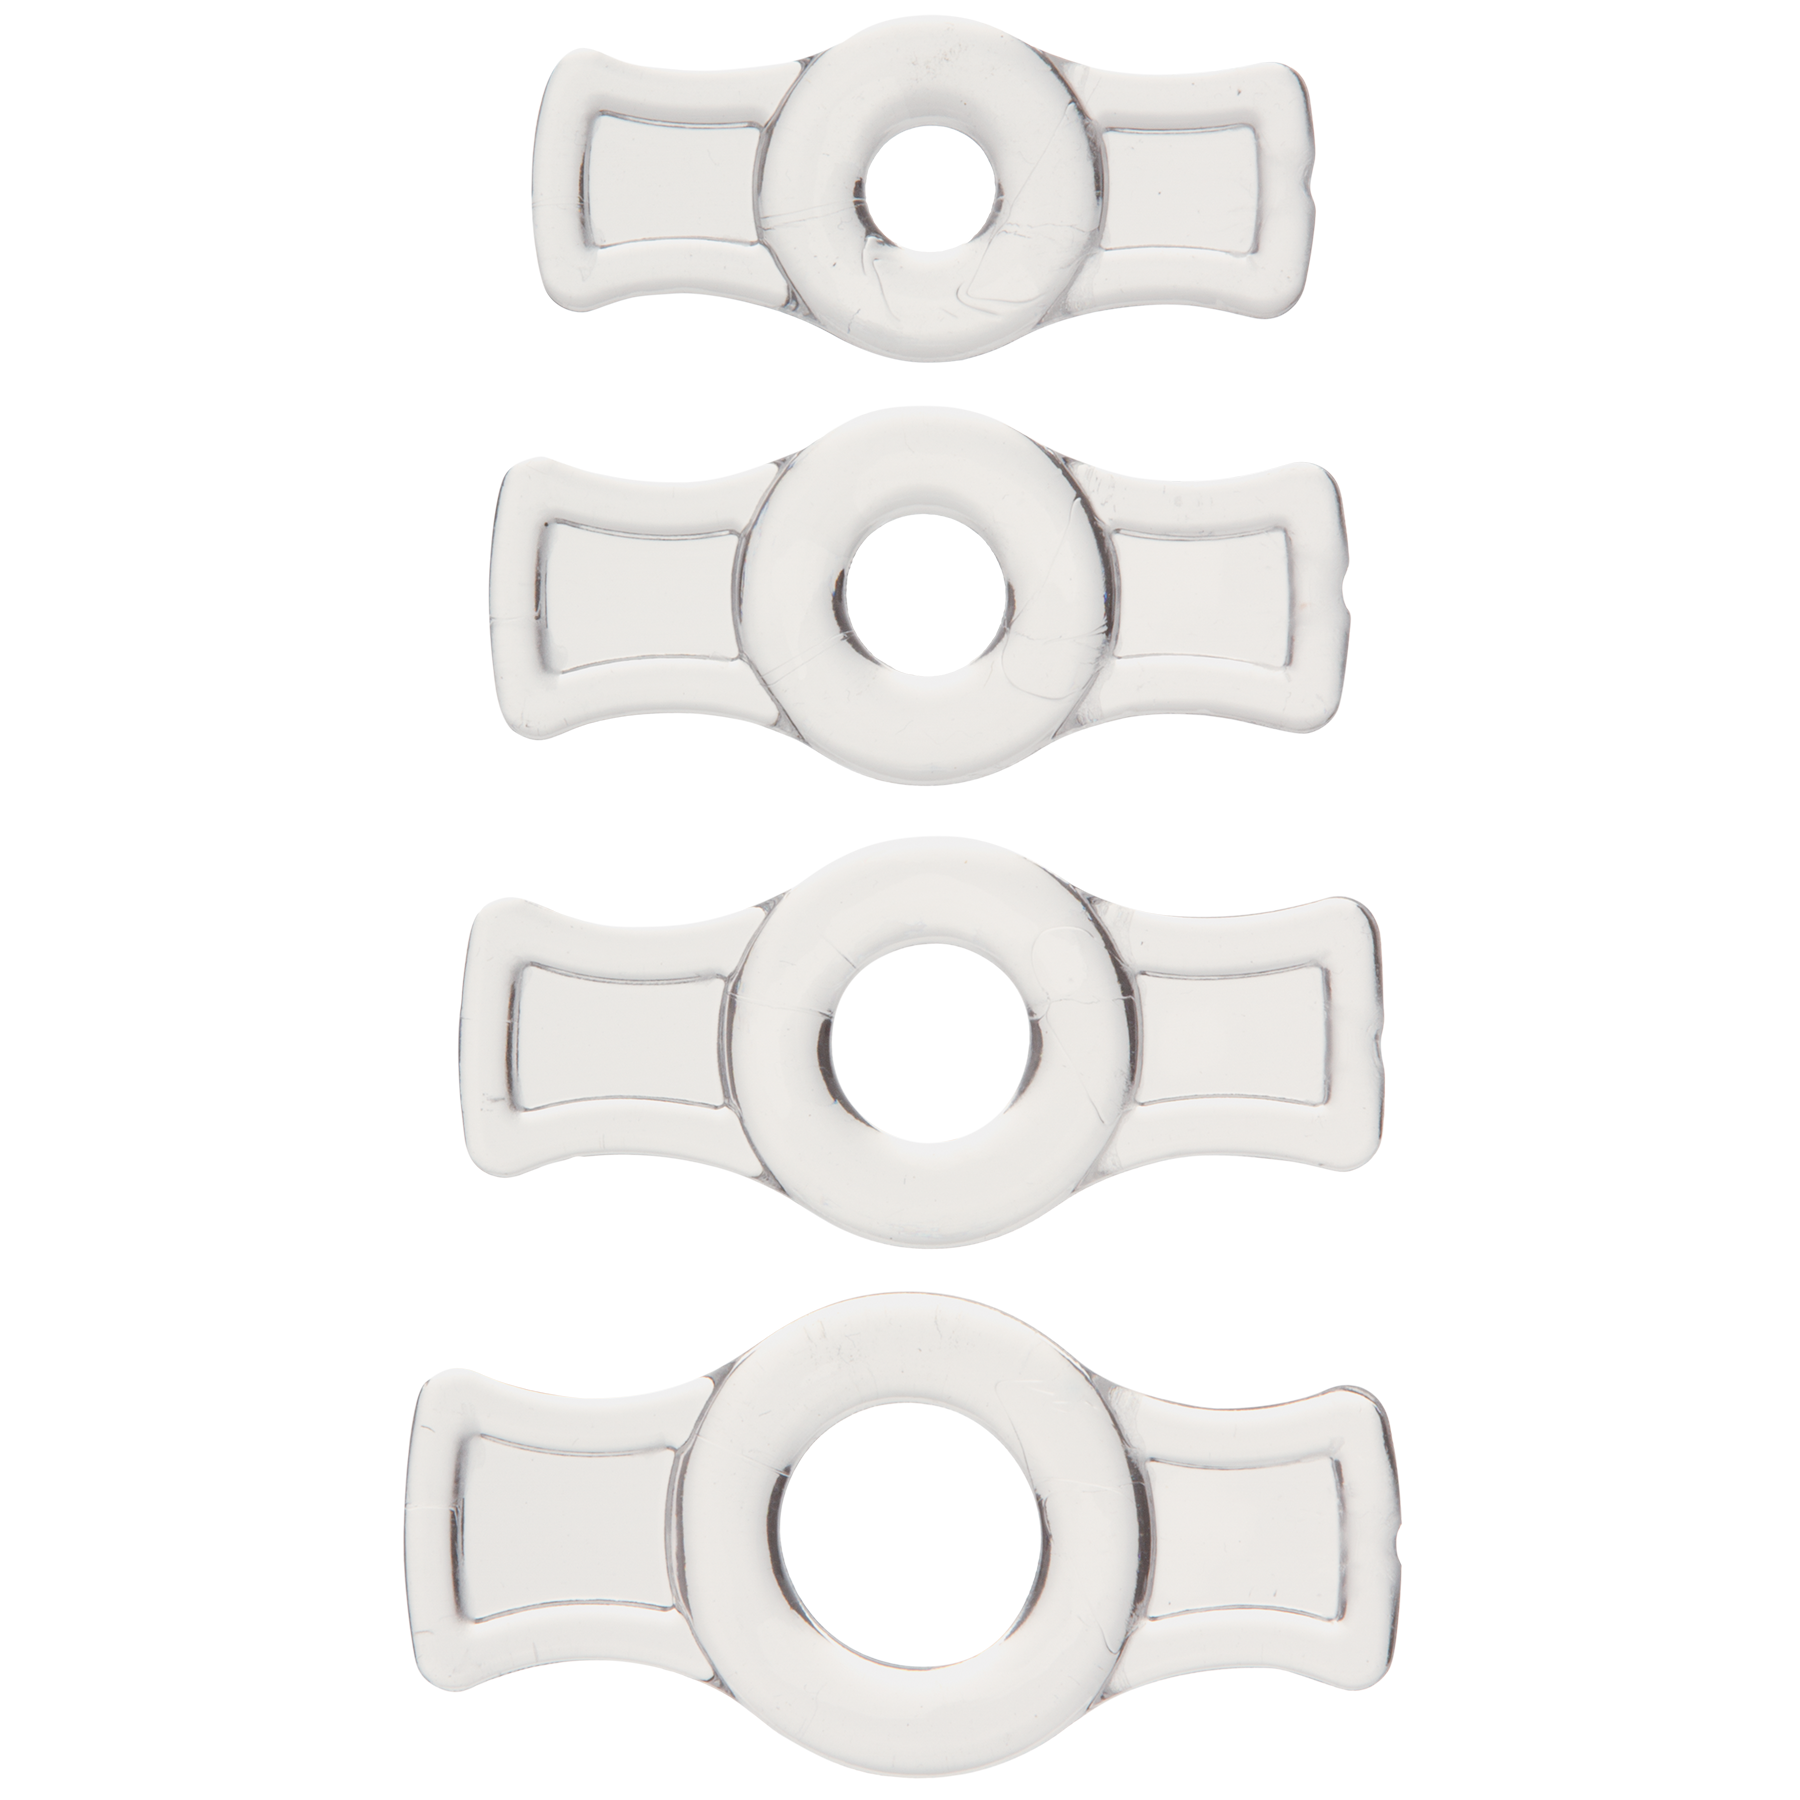 TitanMen Stretch-To-Fit (3-Pack) • Cock Ring Set